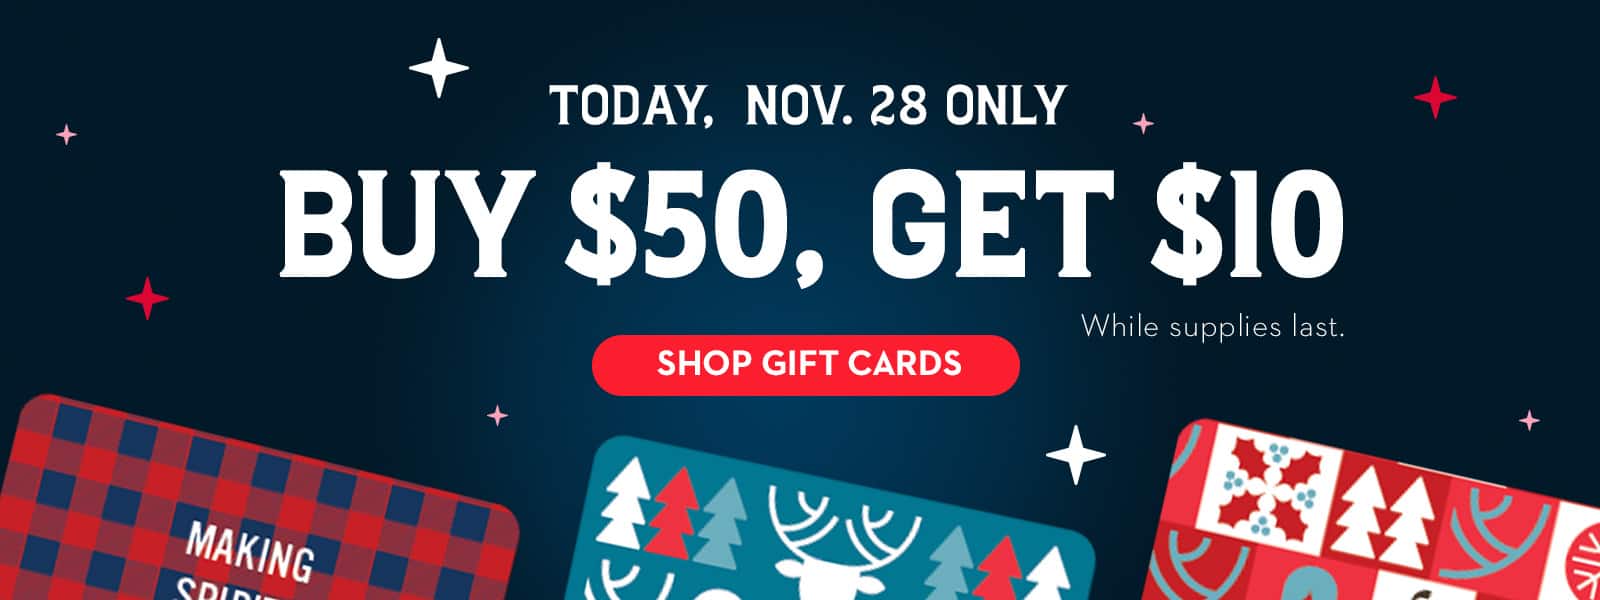 Today, Nov. 28 only. Buy $50, Get $10, while supplies last. Shop gift cards now.